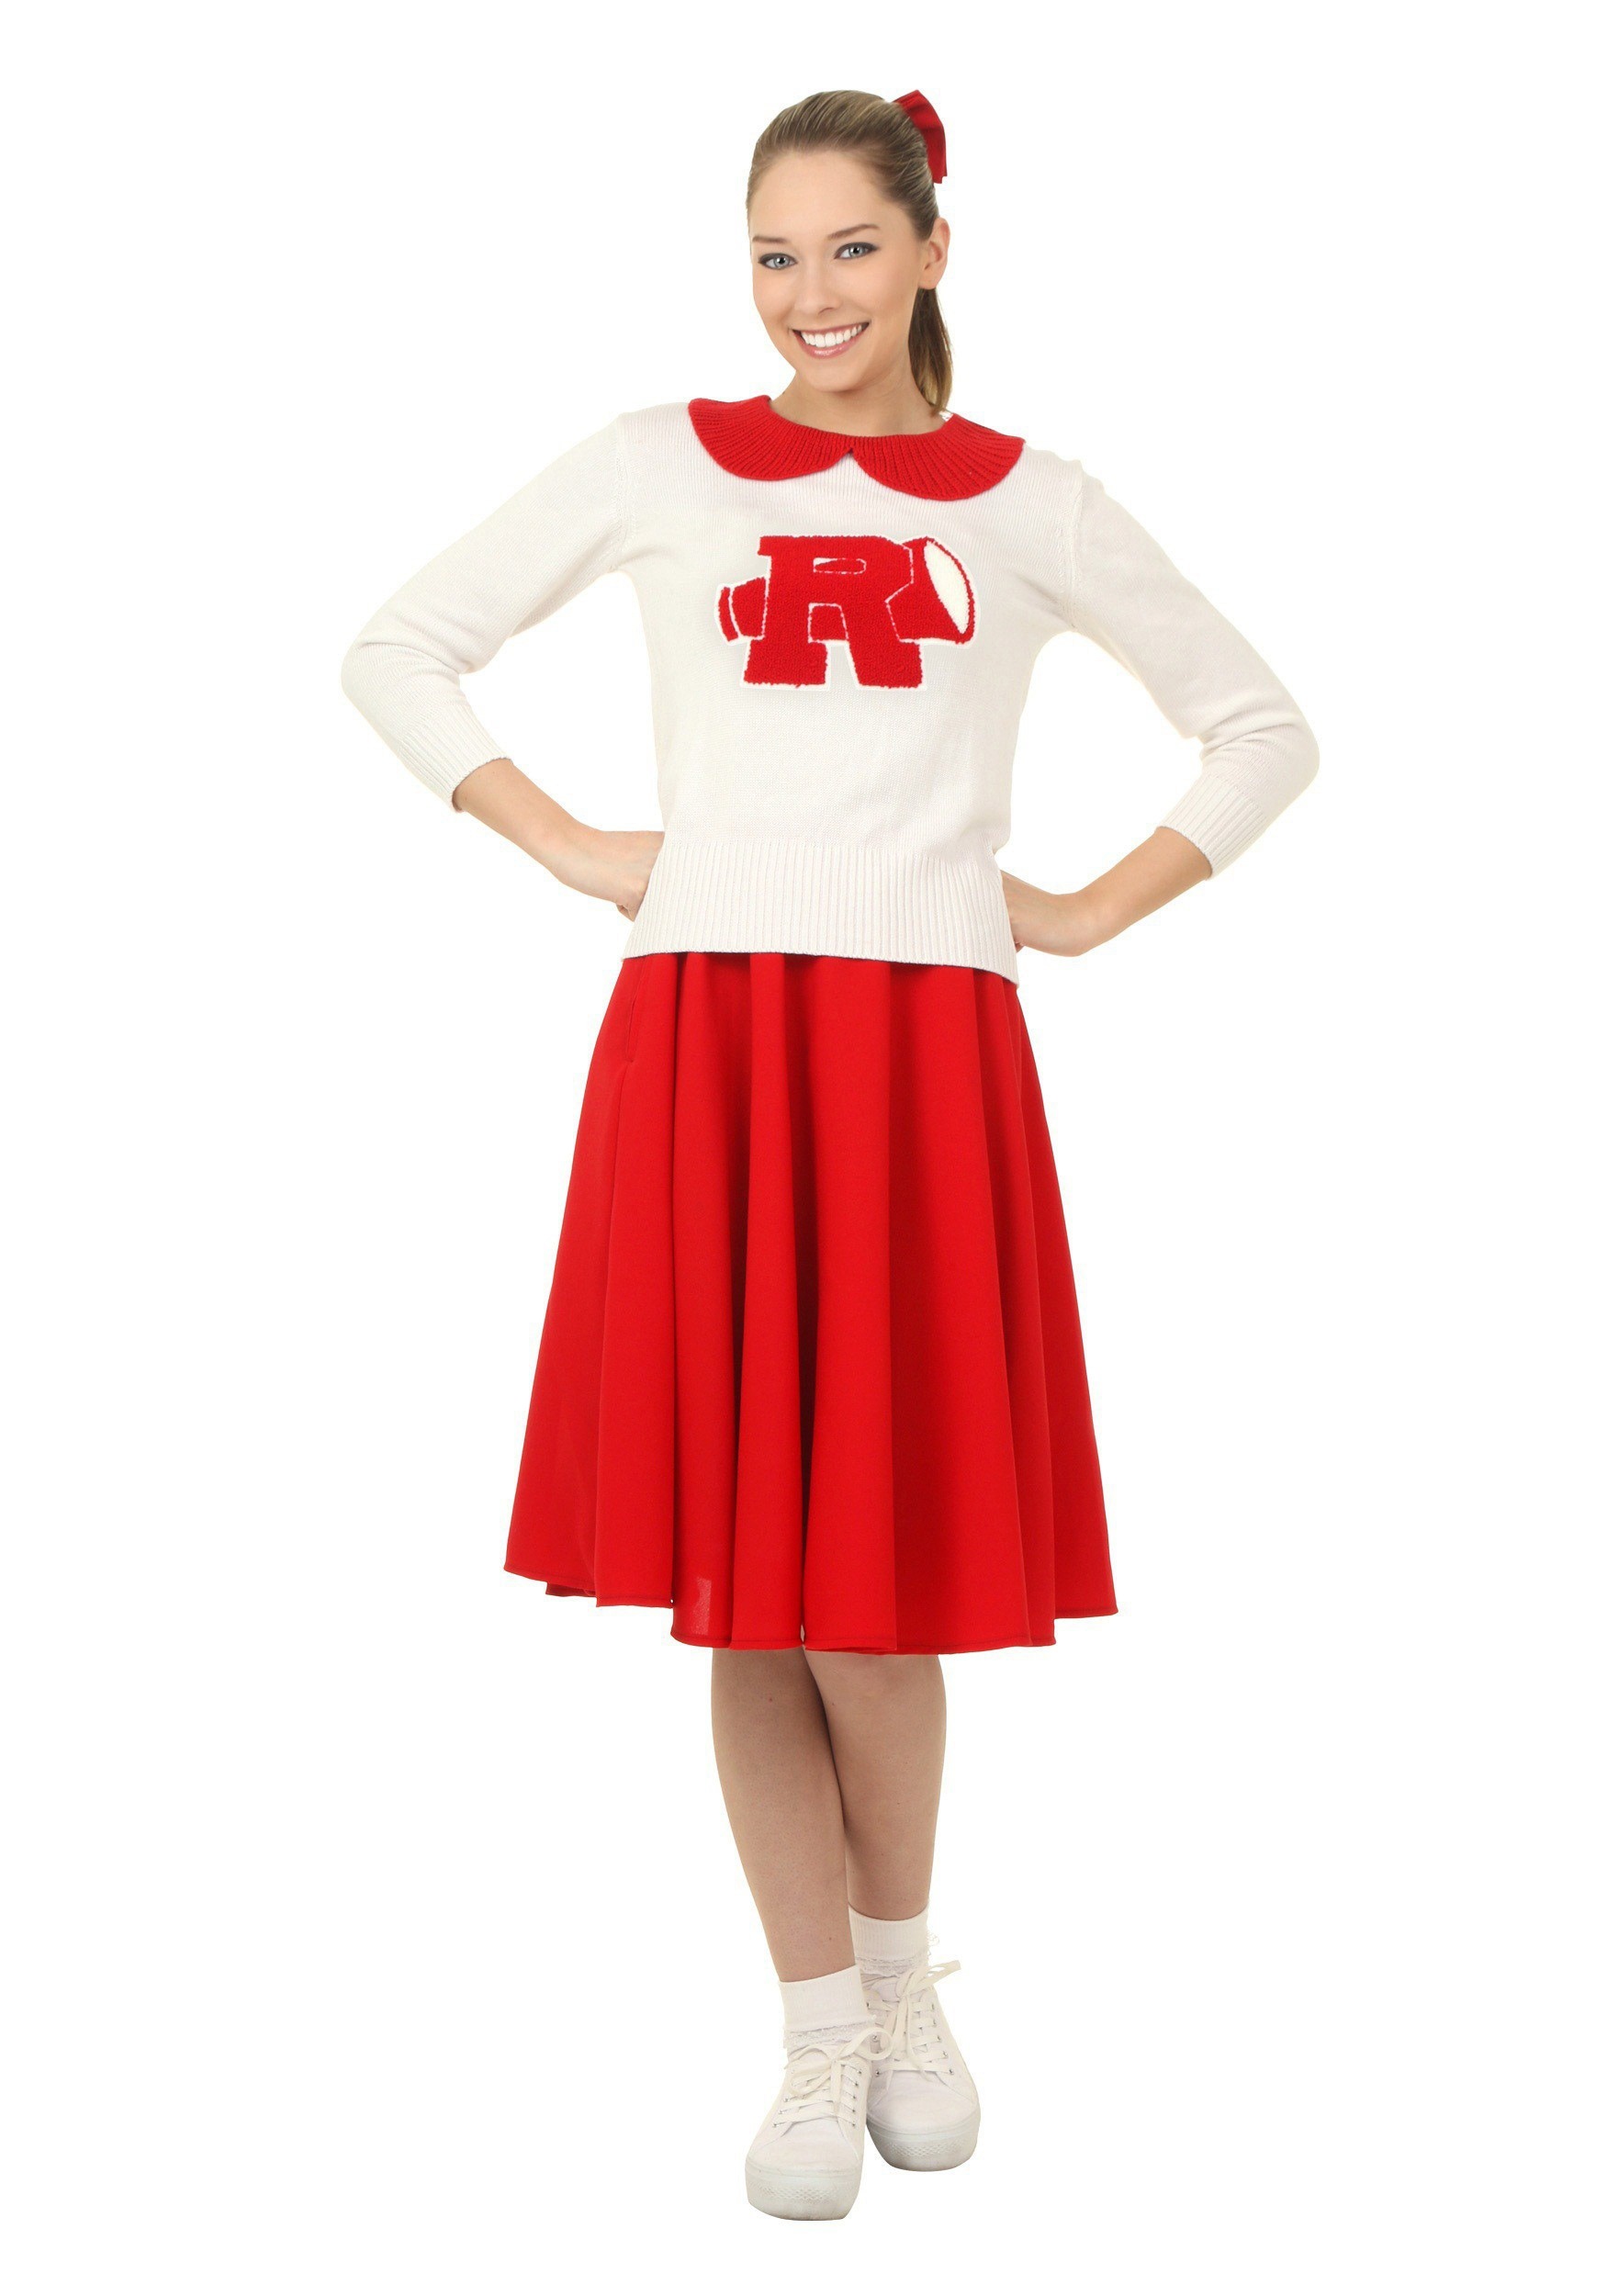 Image of Grease Rydell High Plus Size Cheerleader Costume for Women ID FUN6096PL-4X